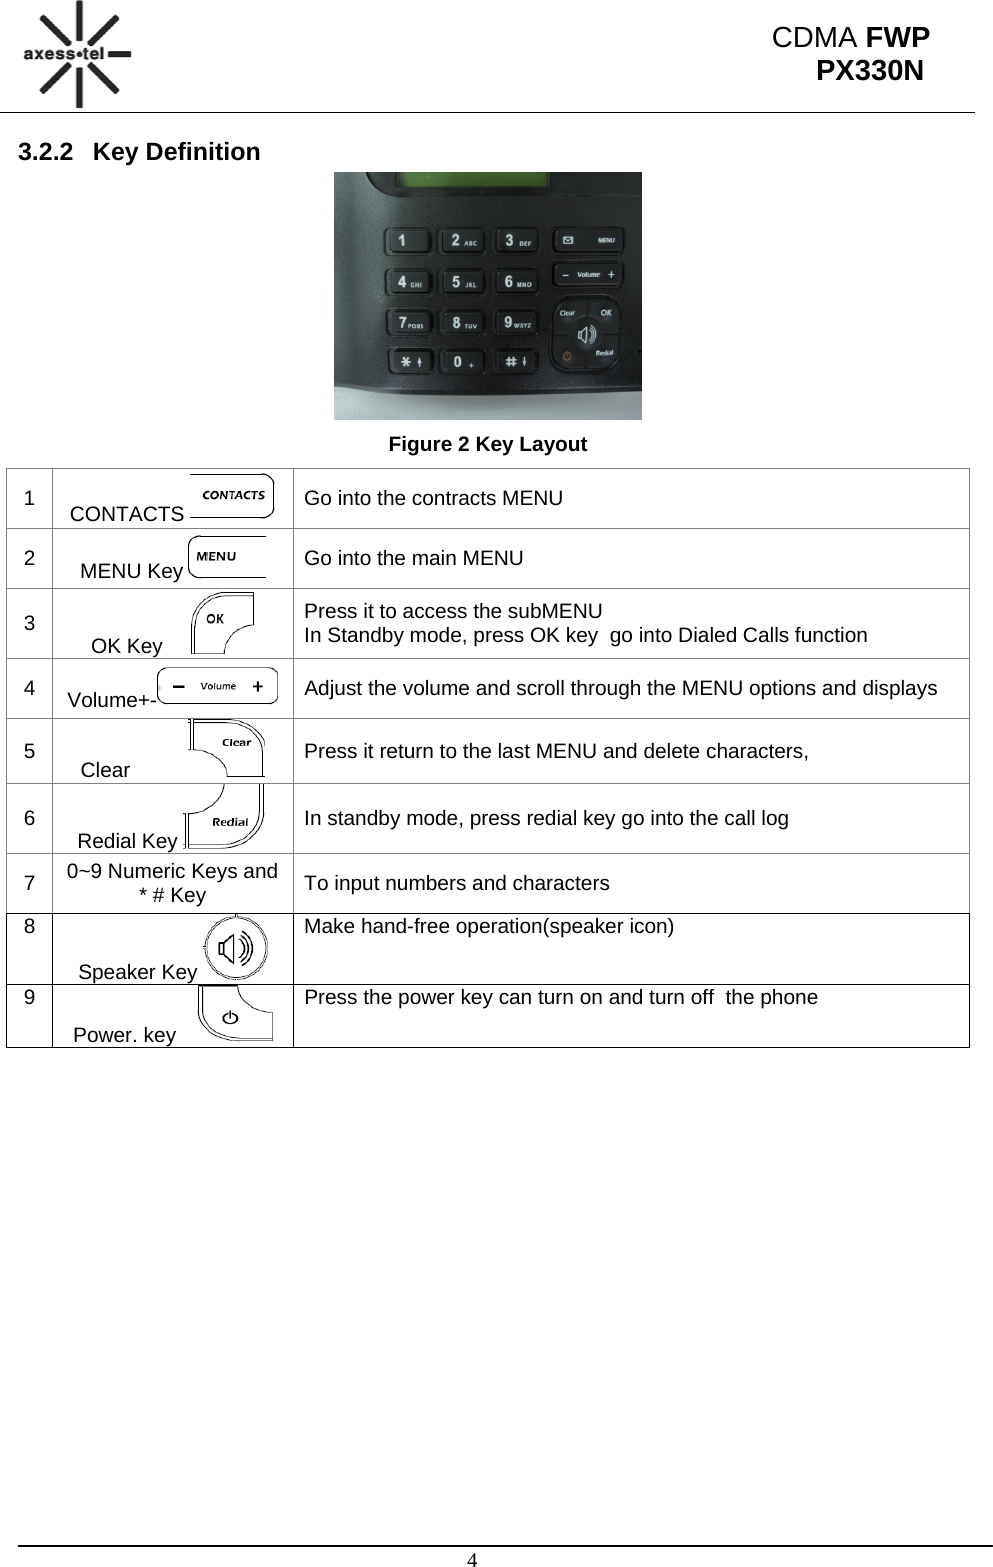                                                                                                      4 CDMA FWP PX330N3.2.2 Key Definition  Figure 2 Key Layout 1  CONTACTS   Go into the contracts MENU 2  MENU Key   Go into the main MENU 3  OK Key      Press it to access the subMENU In Standby mode, press OK key  go into Dialed Calls function 4  Volume+-  Adjust the volume and scroll through the MENU options and displays 5  Clear            Press it return to the last MENU and delete characters, 6  Redial Key   In standby mode, press redial key go into the call log 7  0~9 Numeric Keys and * # Key  To input numbers and characters 8 Speaker Key   Make hand-free operation(speaker icon) 9 Power. key    Press the power key can turn on and turn off  the phone   